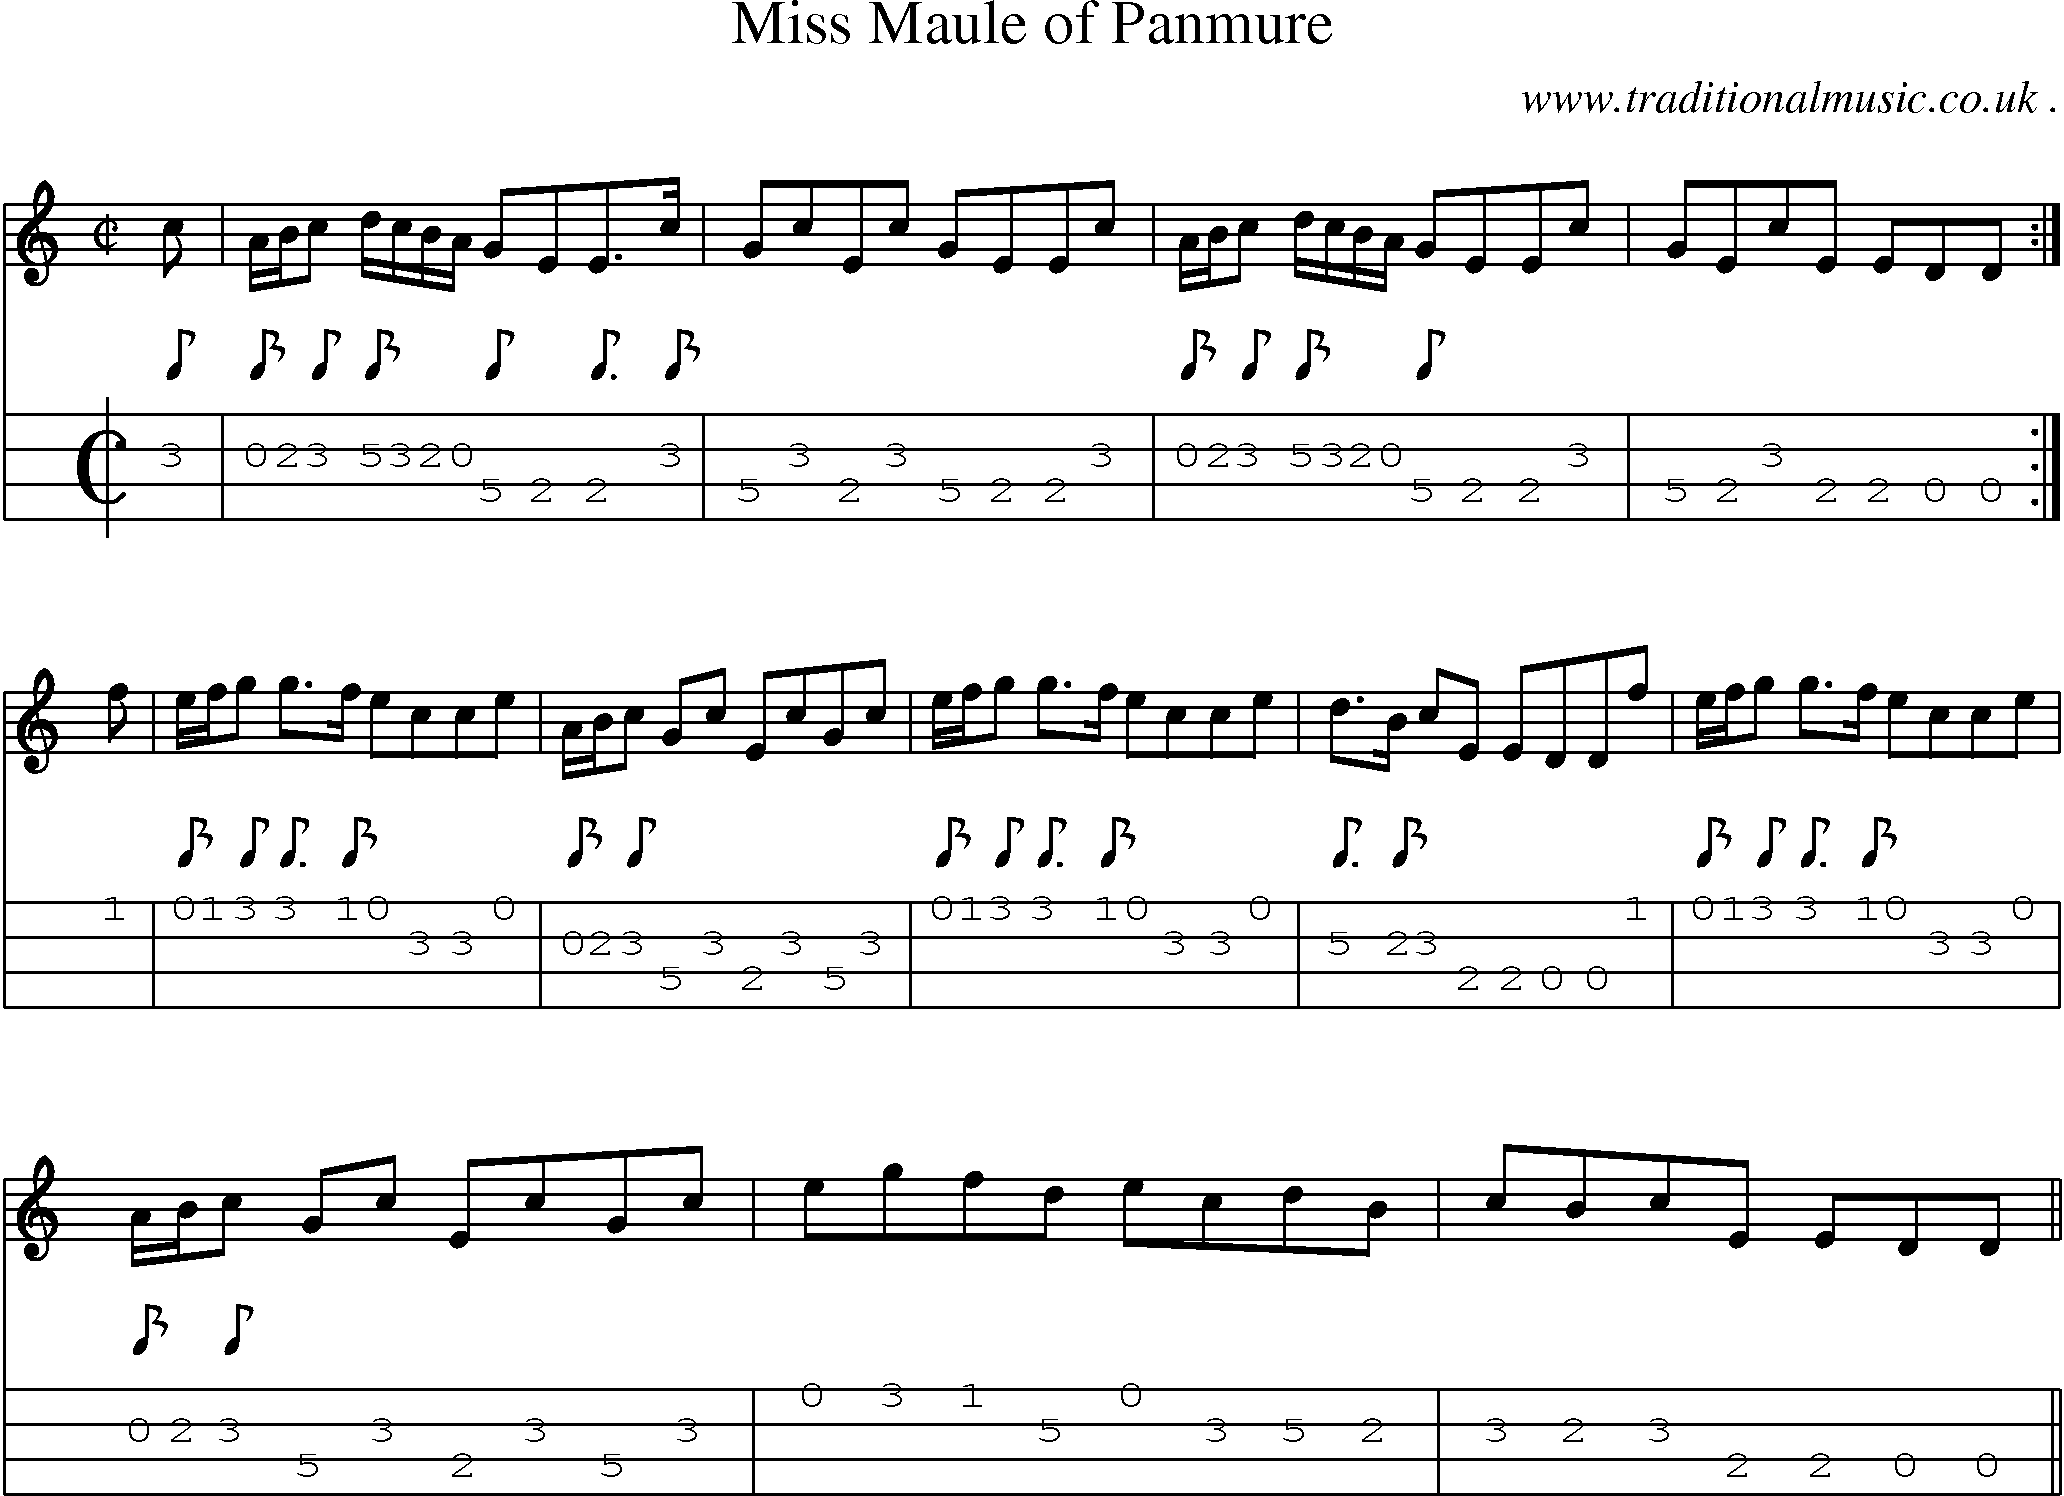 Sheet-music  score, Chords and Mandolin Tabs for Miss Maule Of Panmure